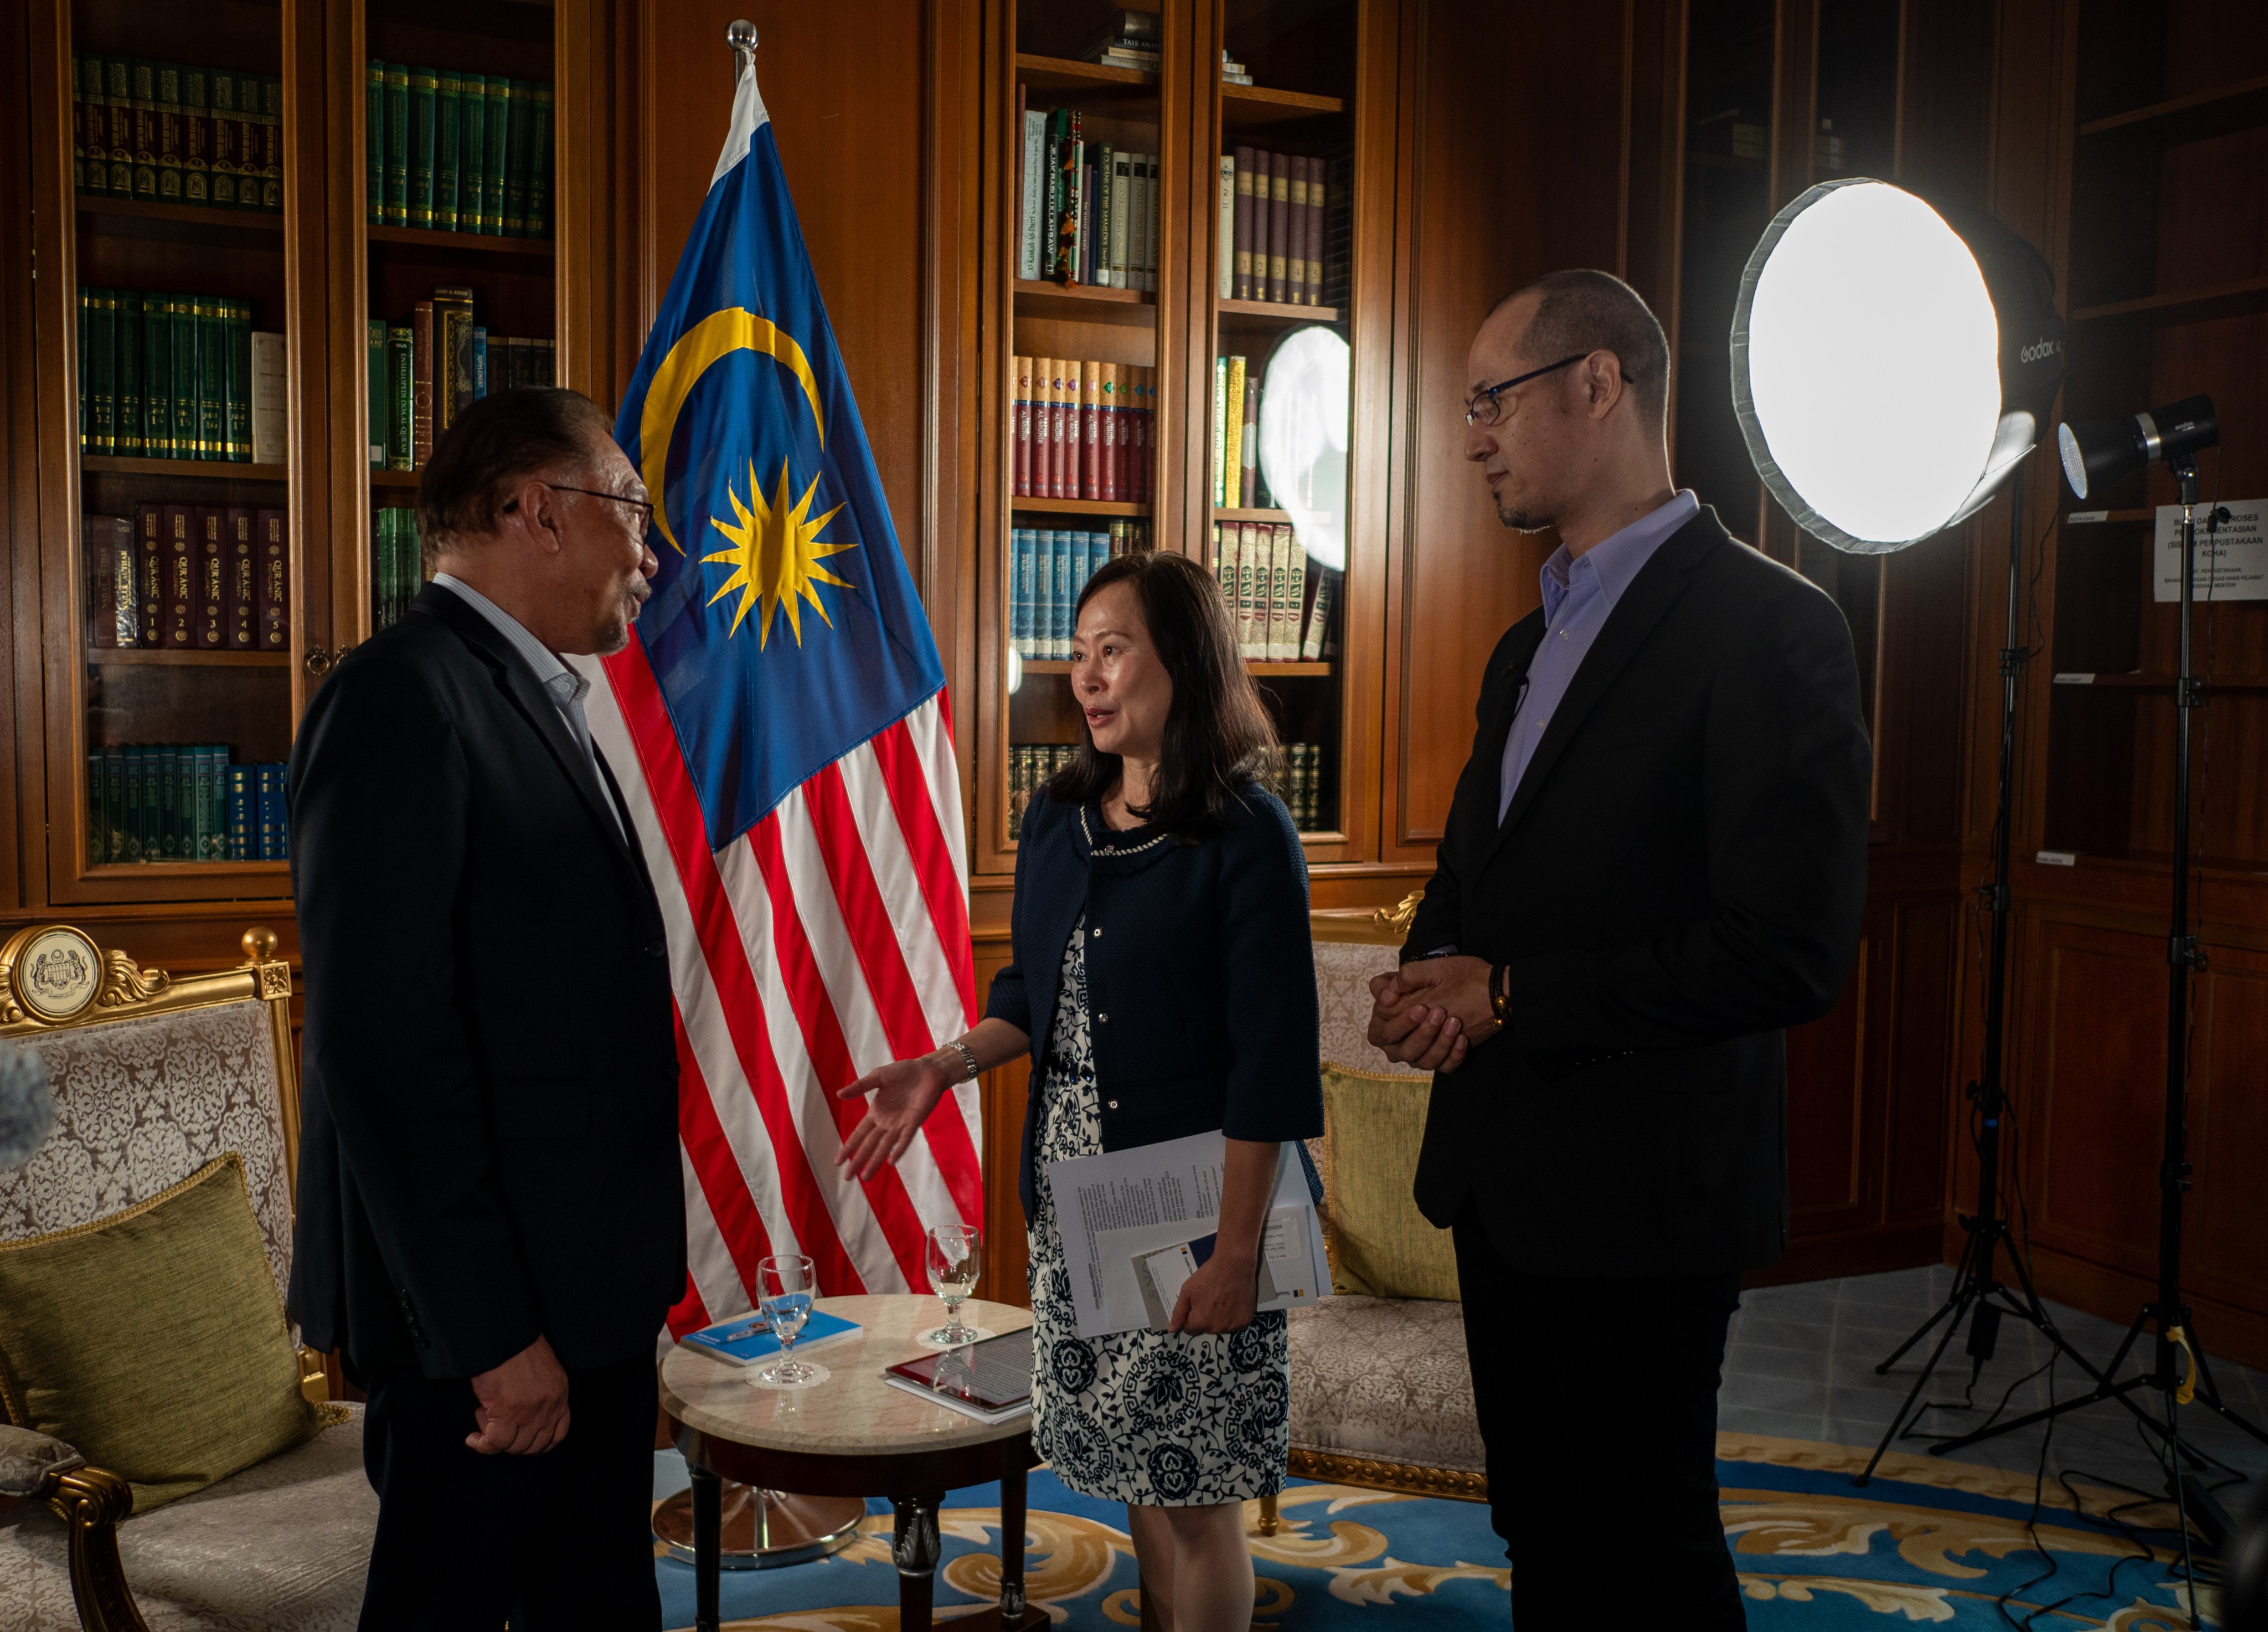 (From left) Malaysia’s prime minister meets the Post’s editor-in-chief Tammy Tam and managing editor for content Yonden Lhatoo at the leader’s office in Putrajaya. Photo: Hadi Azmi